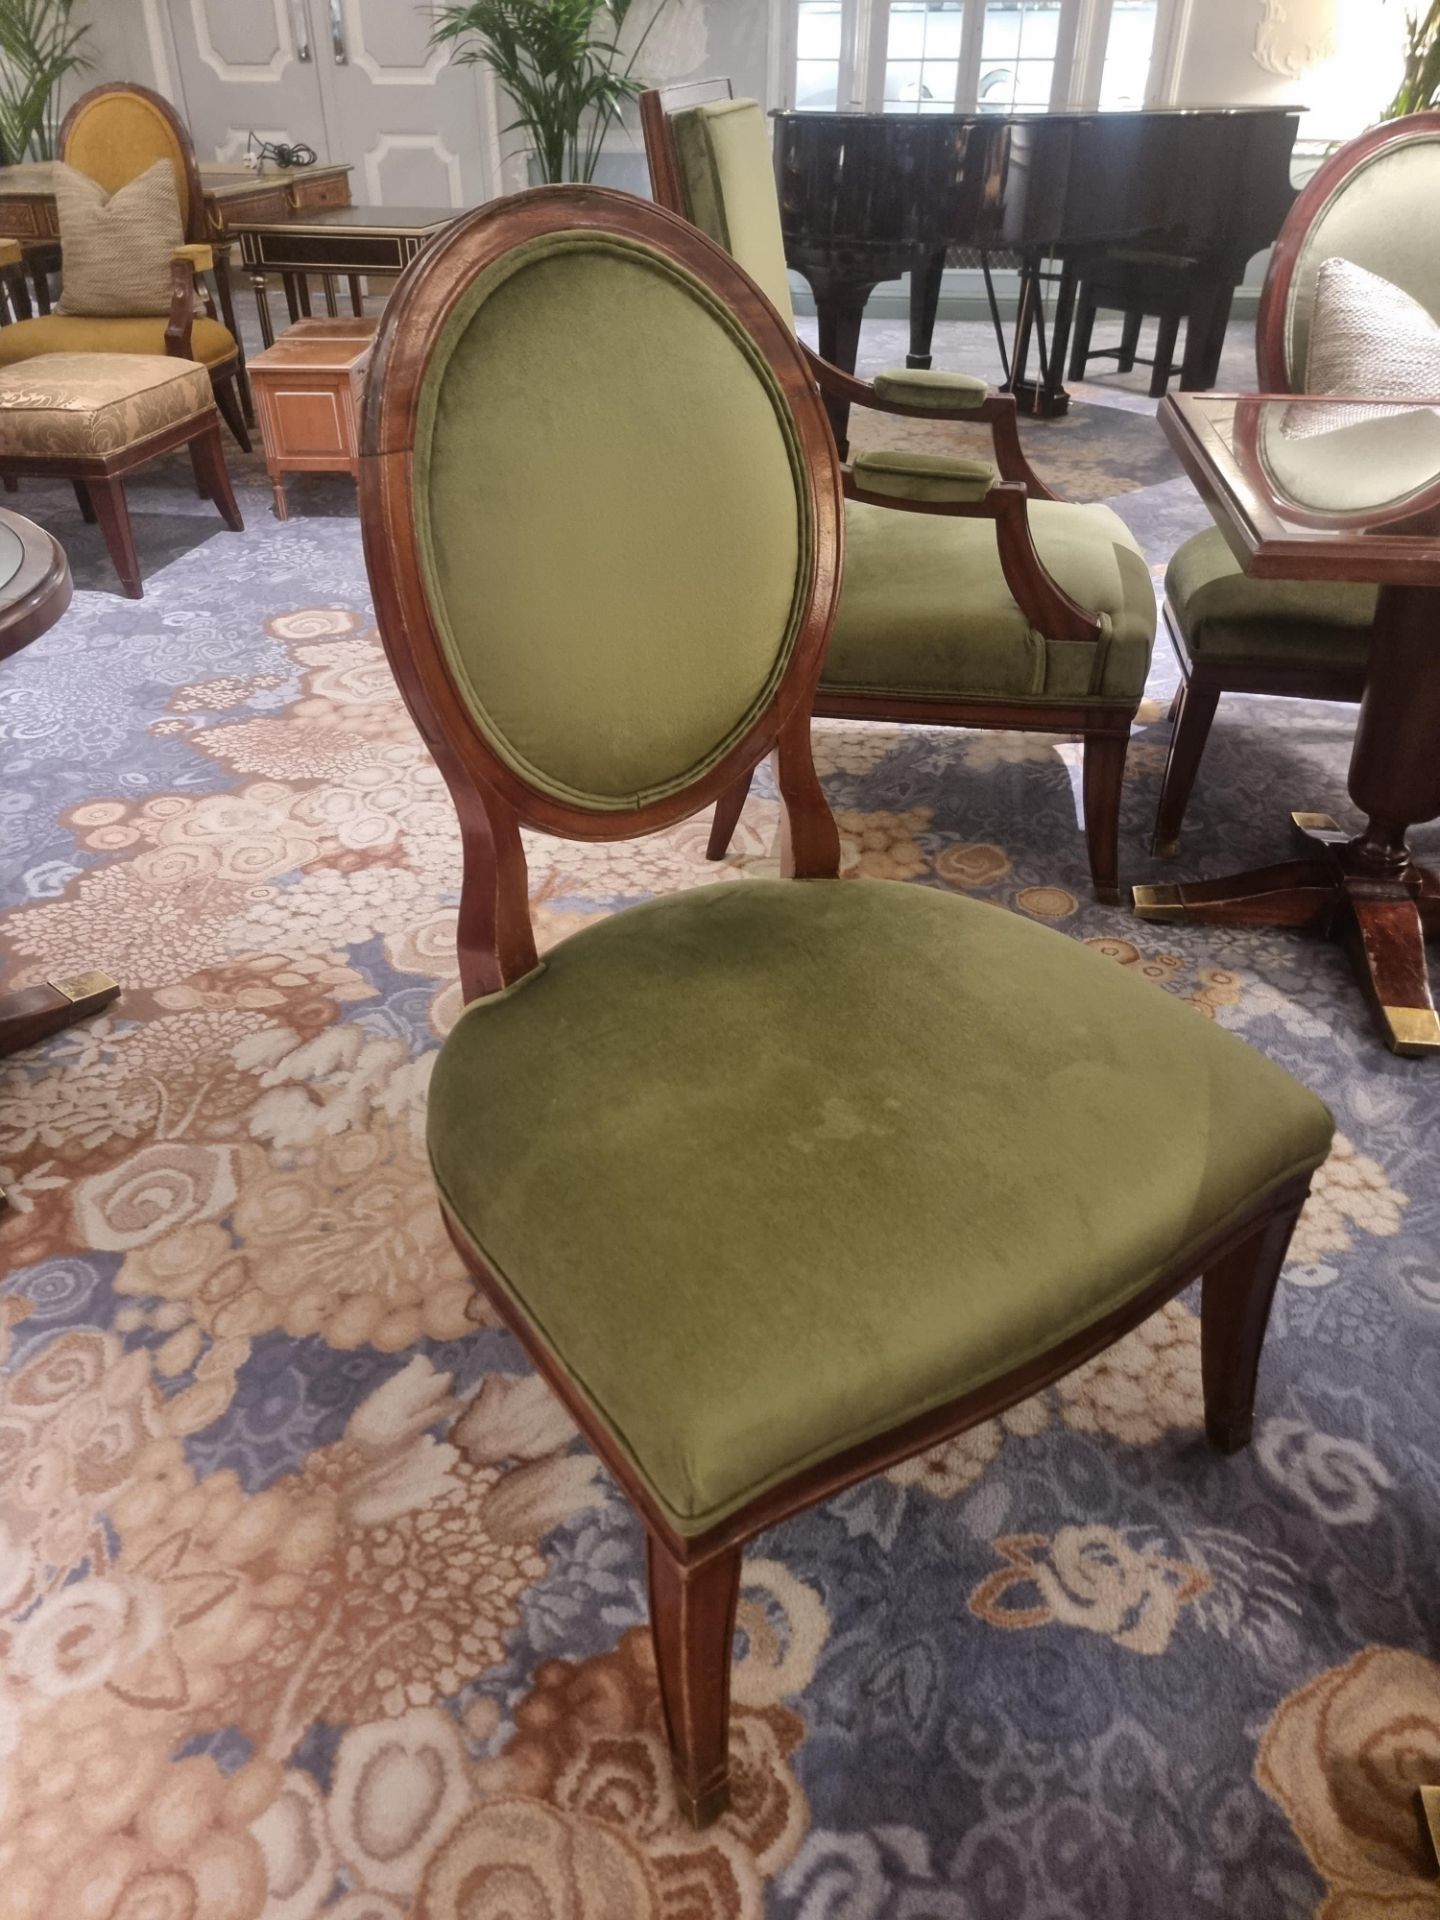 Louis XVI Style Framed And Upholstered Arm Chair In Lelievre Paris Olive Green Salon Chair 68 x 68 x - Bild 4 aus 5